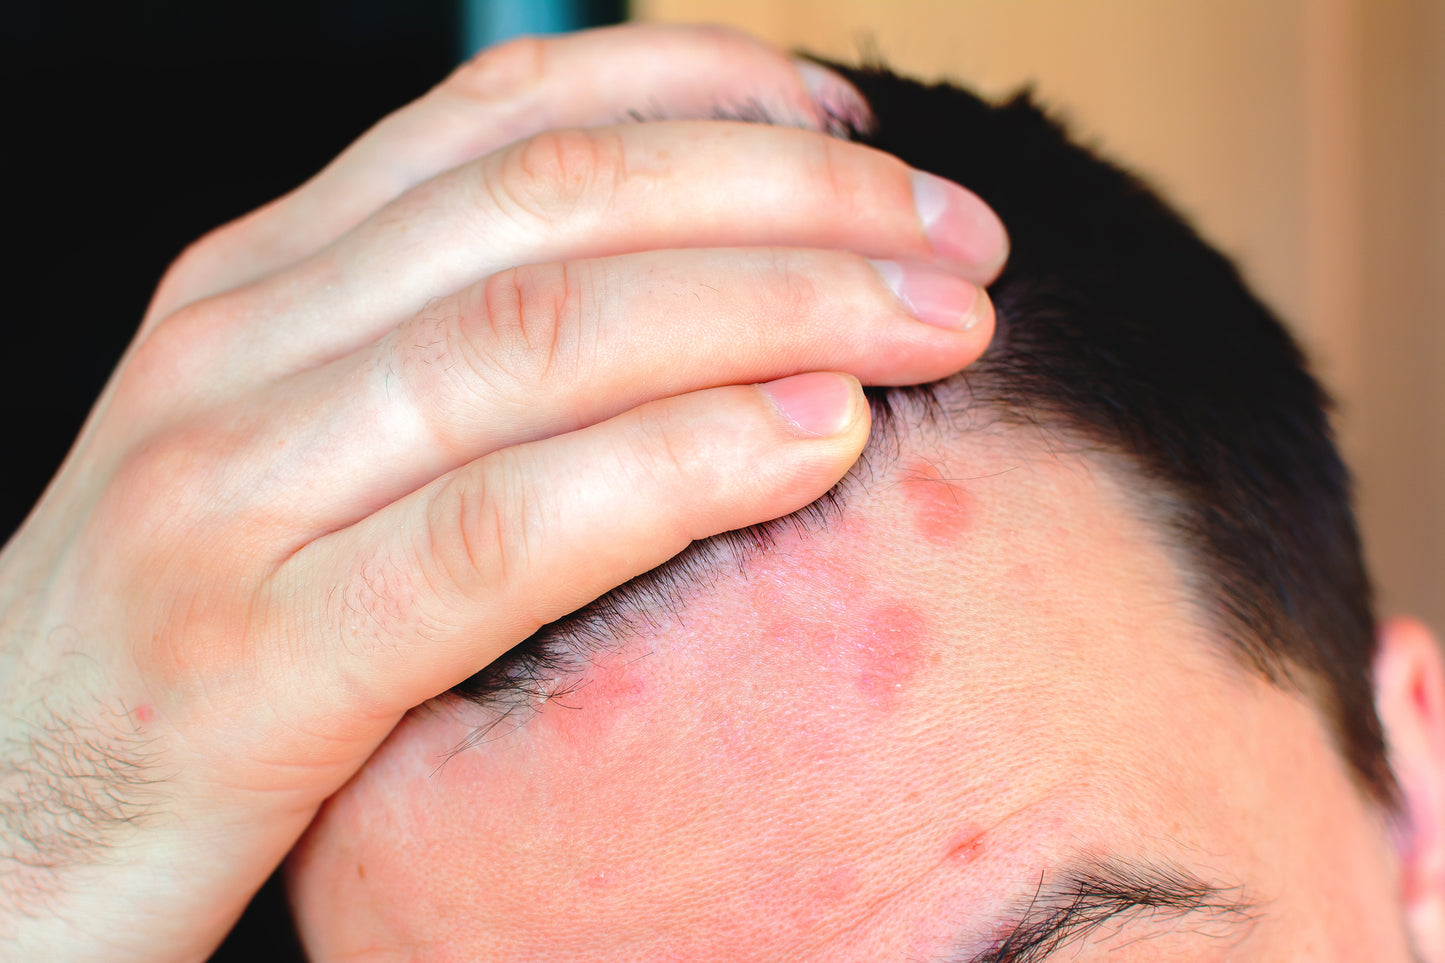 Scalp Problems You Shouldn't Ignore